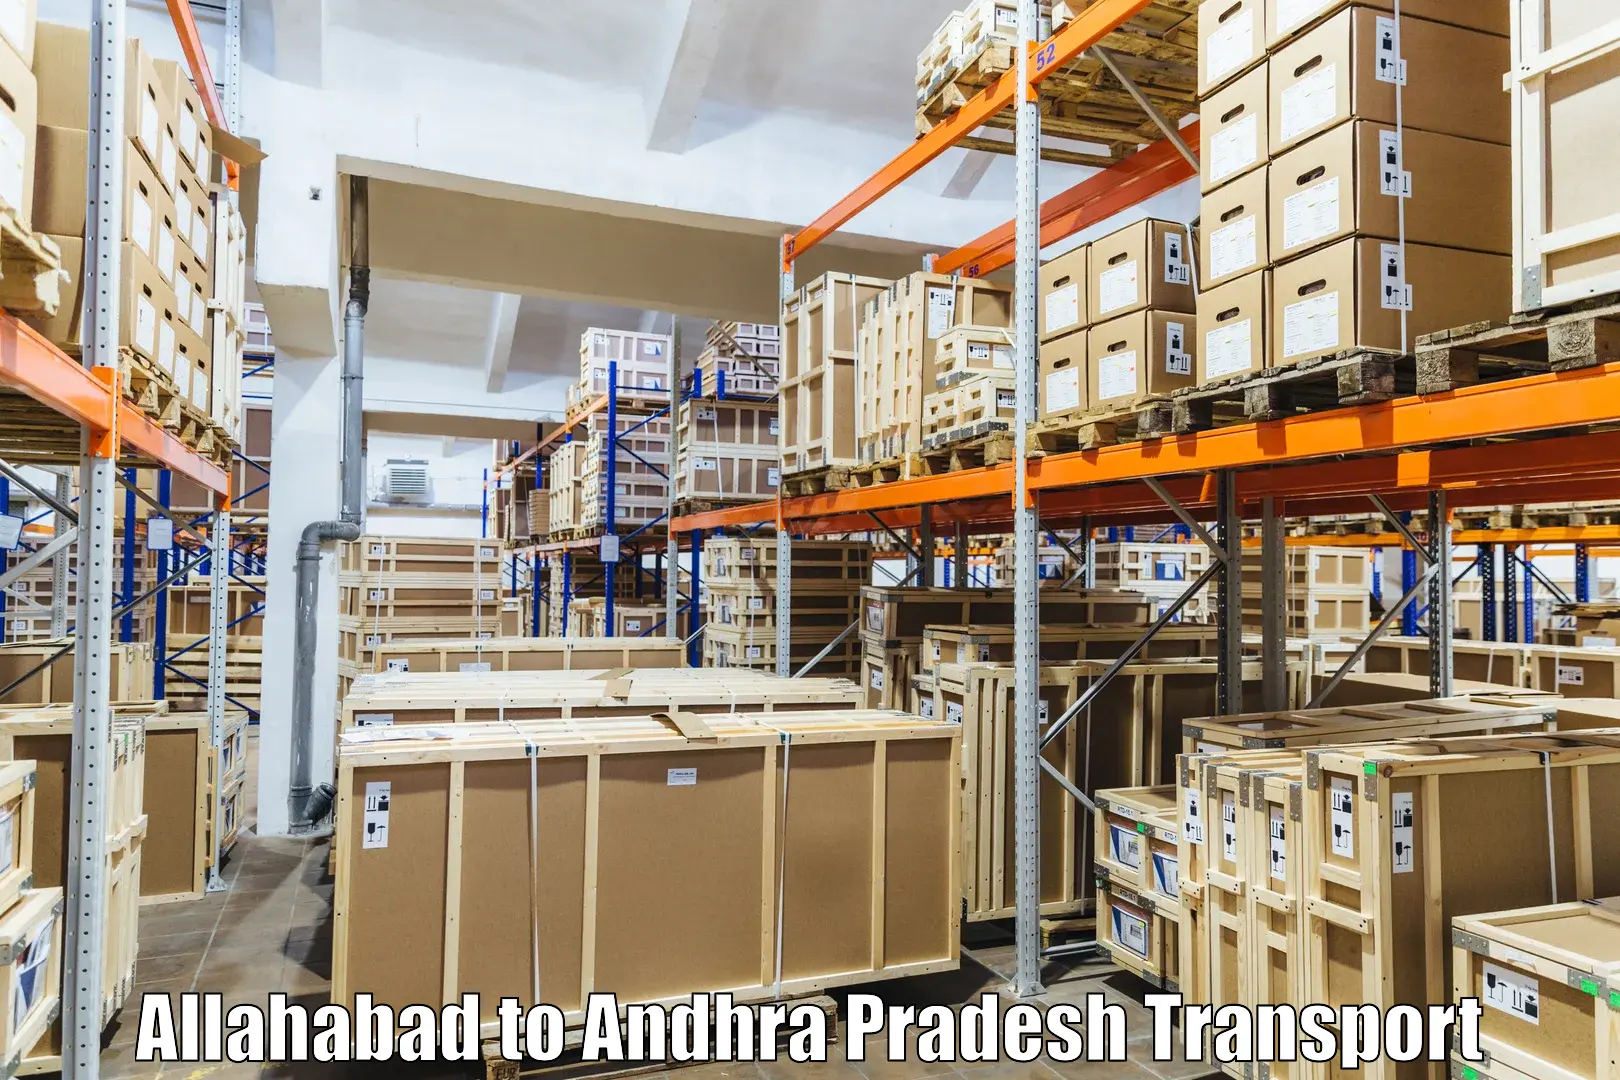 Vehicle transport services in Allahabad to Proddatur